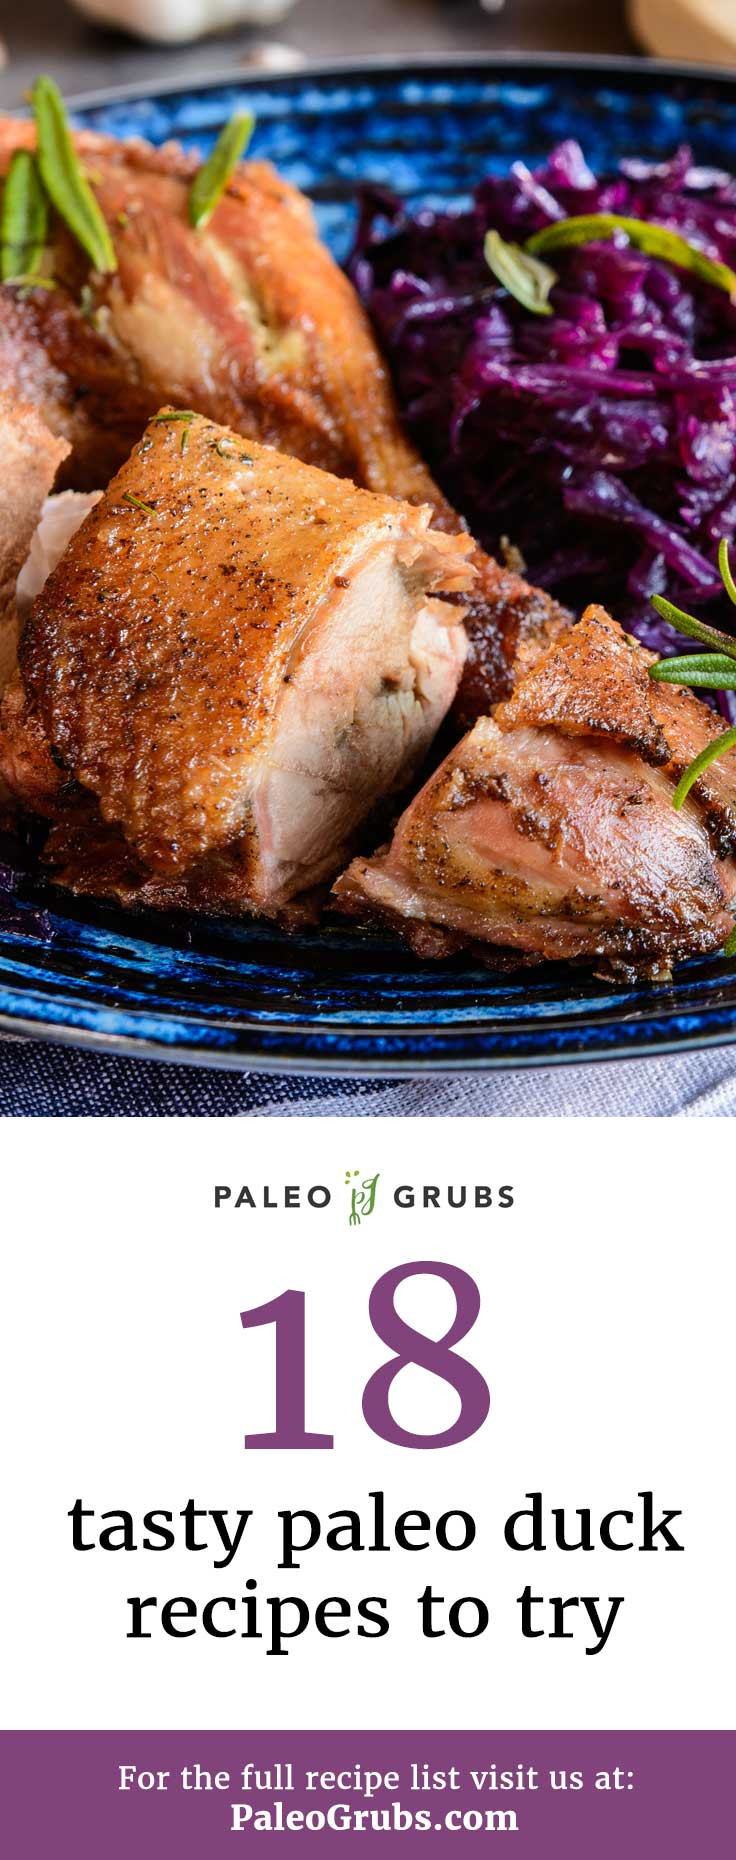 Paleo Duck Recipes
 18 Tasty Paleo Duck Recipes to Try Treat Your Duck Right